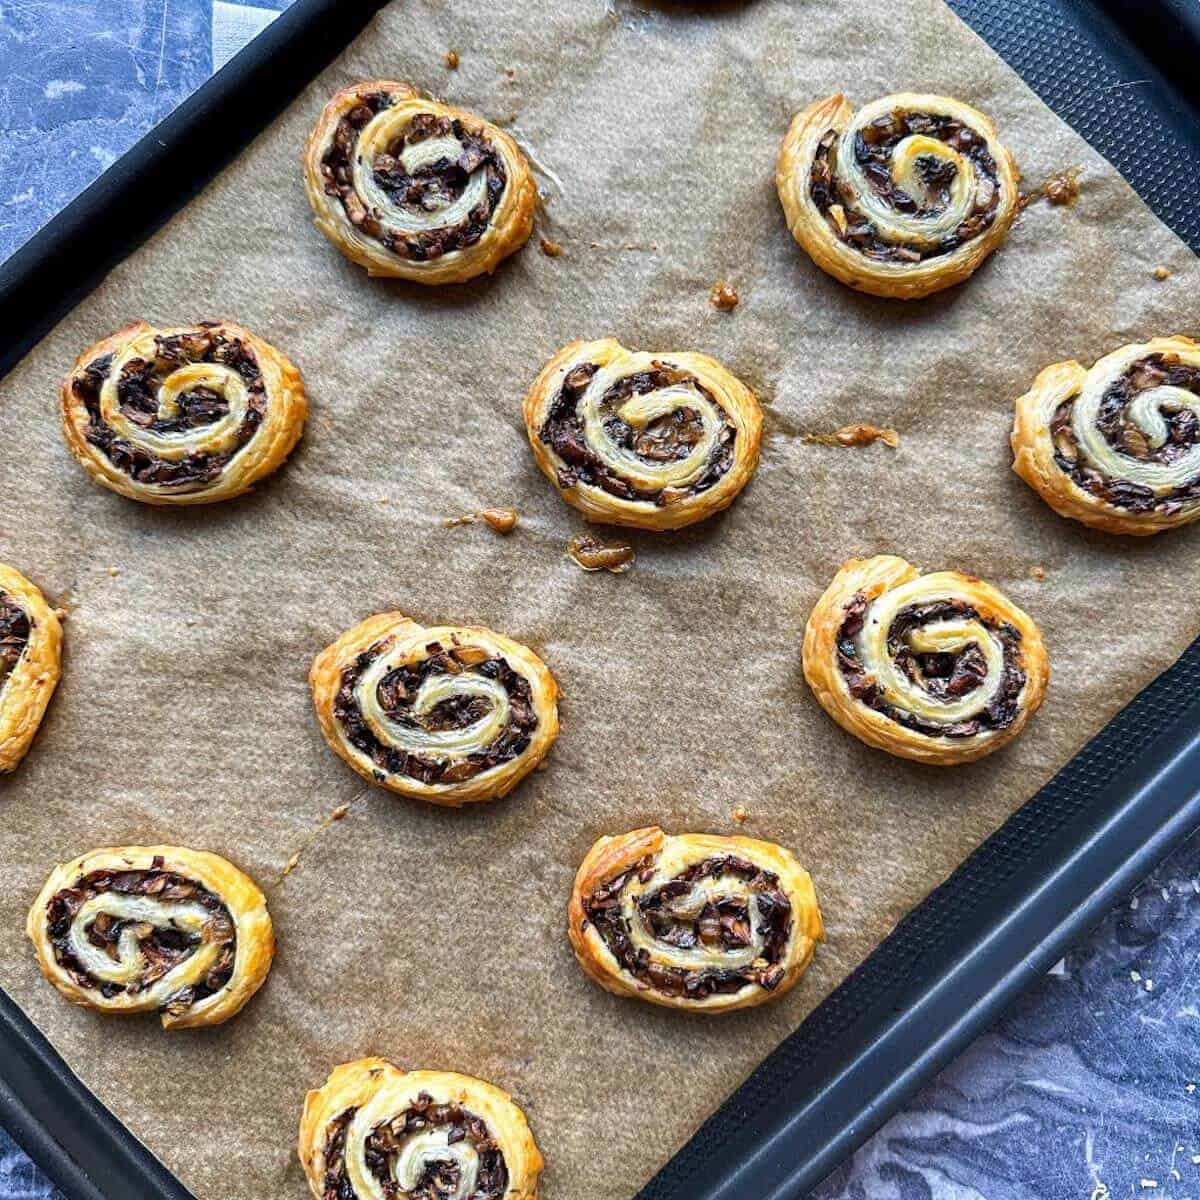 Baked pinwheel appetizers on a baking tray.